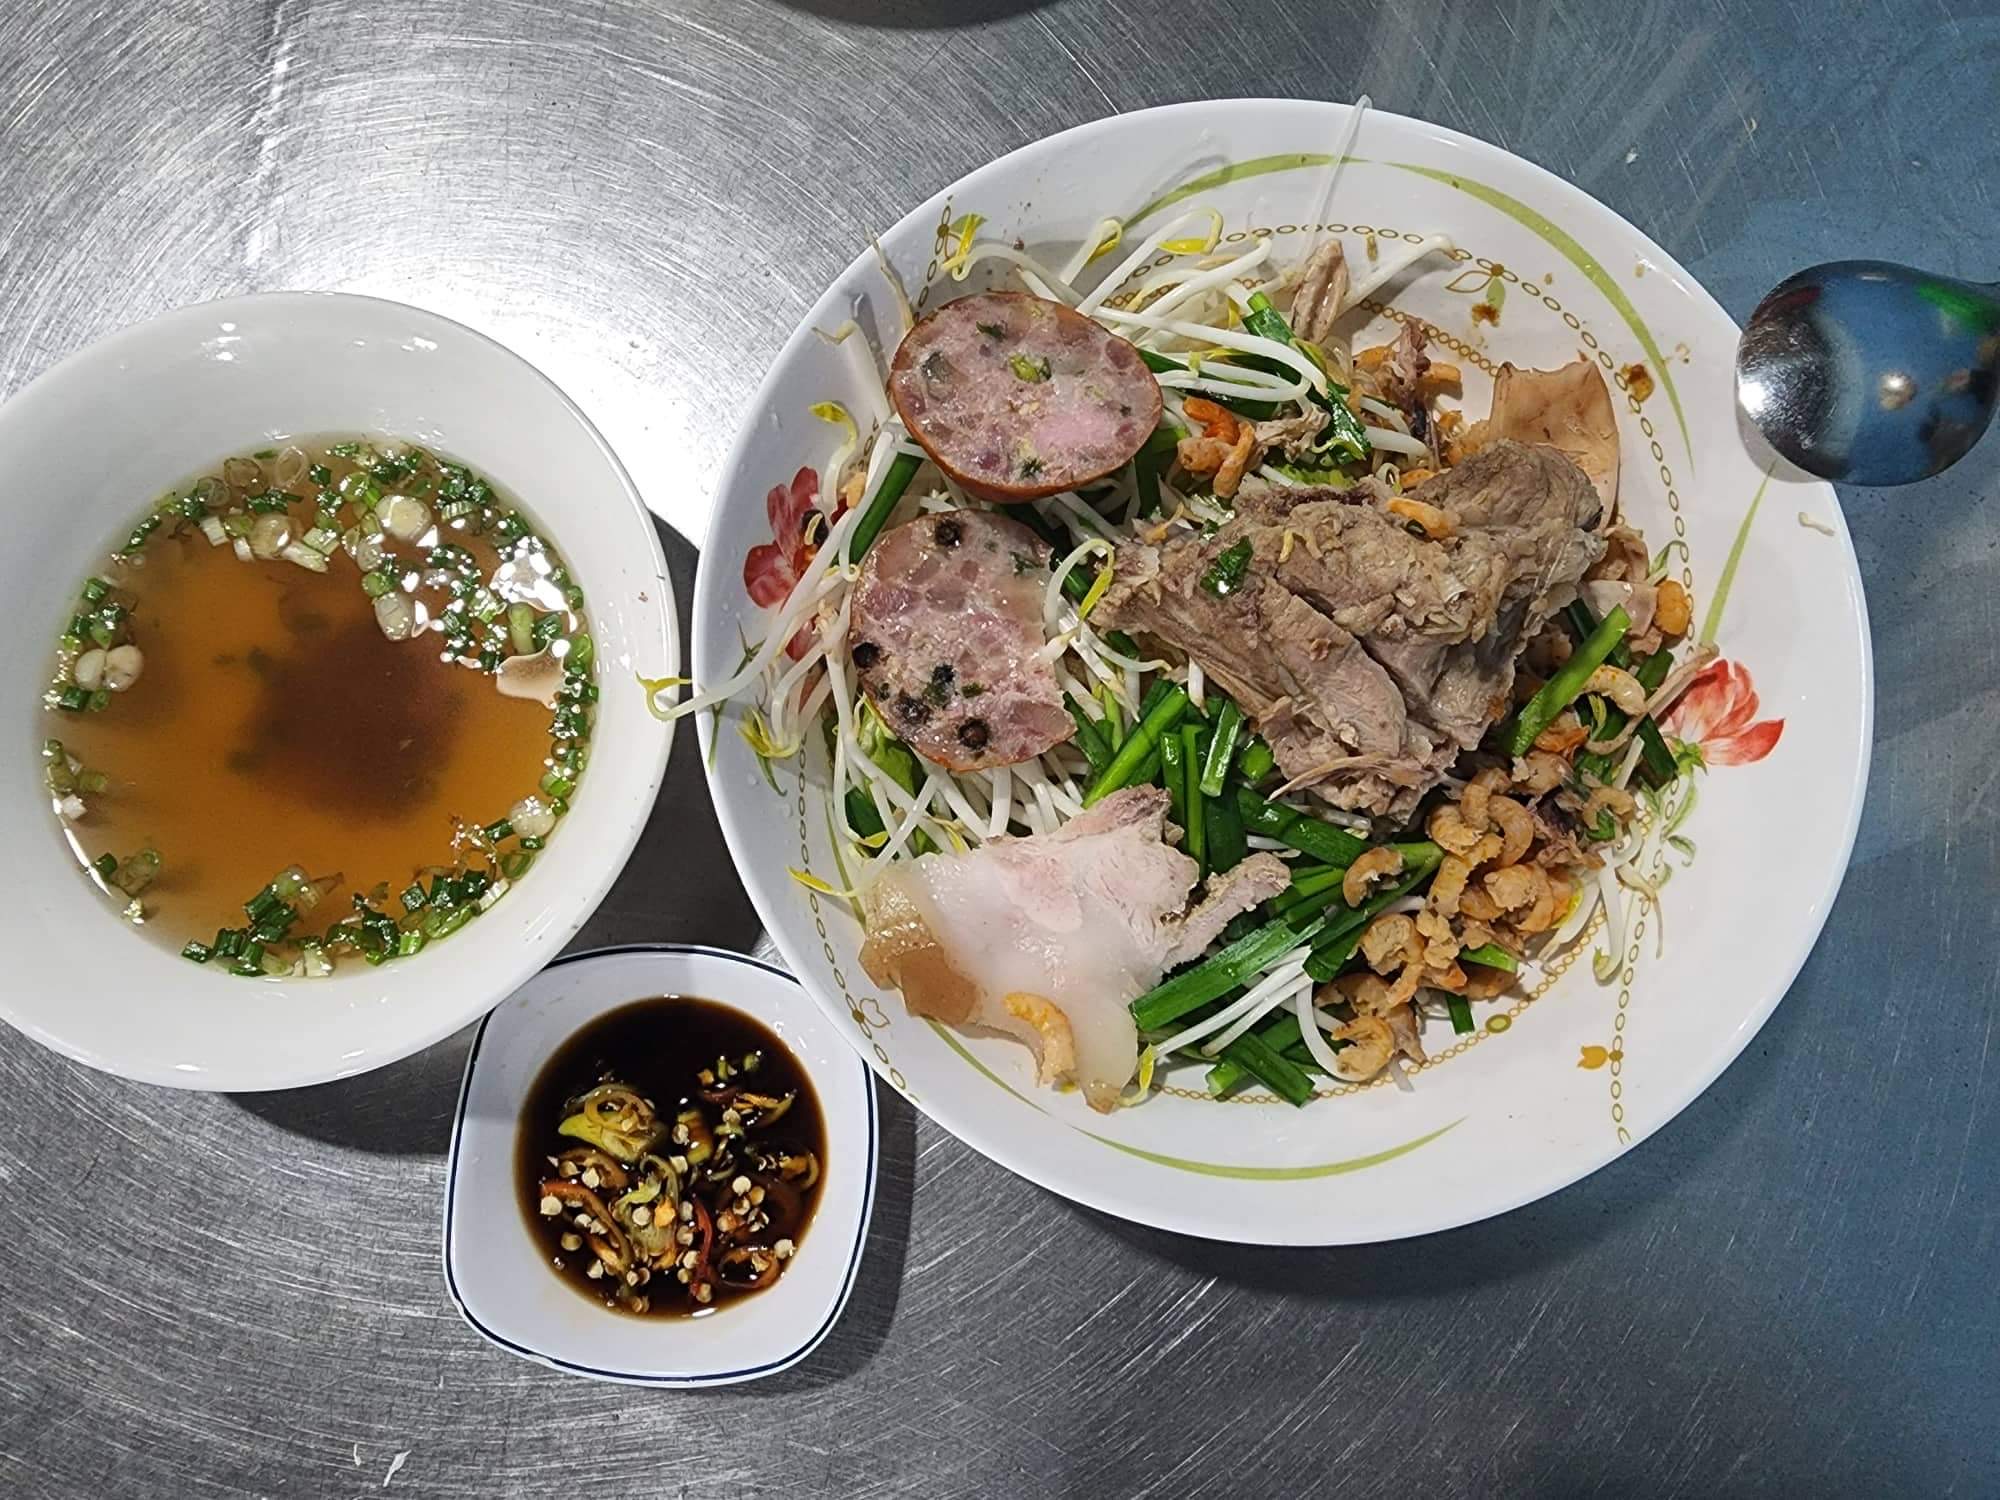 A bowl of 'hu tieu kho' (noodles served separately with broth) at a stall in My Tho City, Tien Giang Province, Vietnam. Photo: Son Lam / Tuoi Tre News